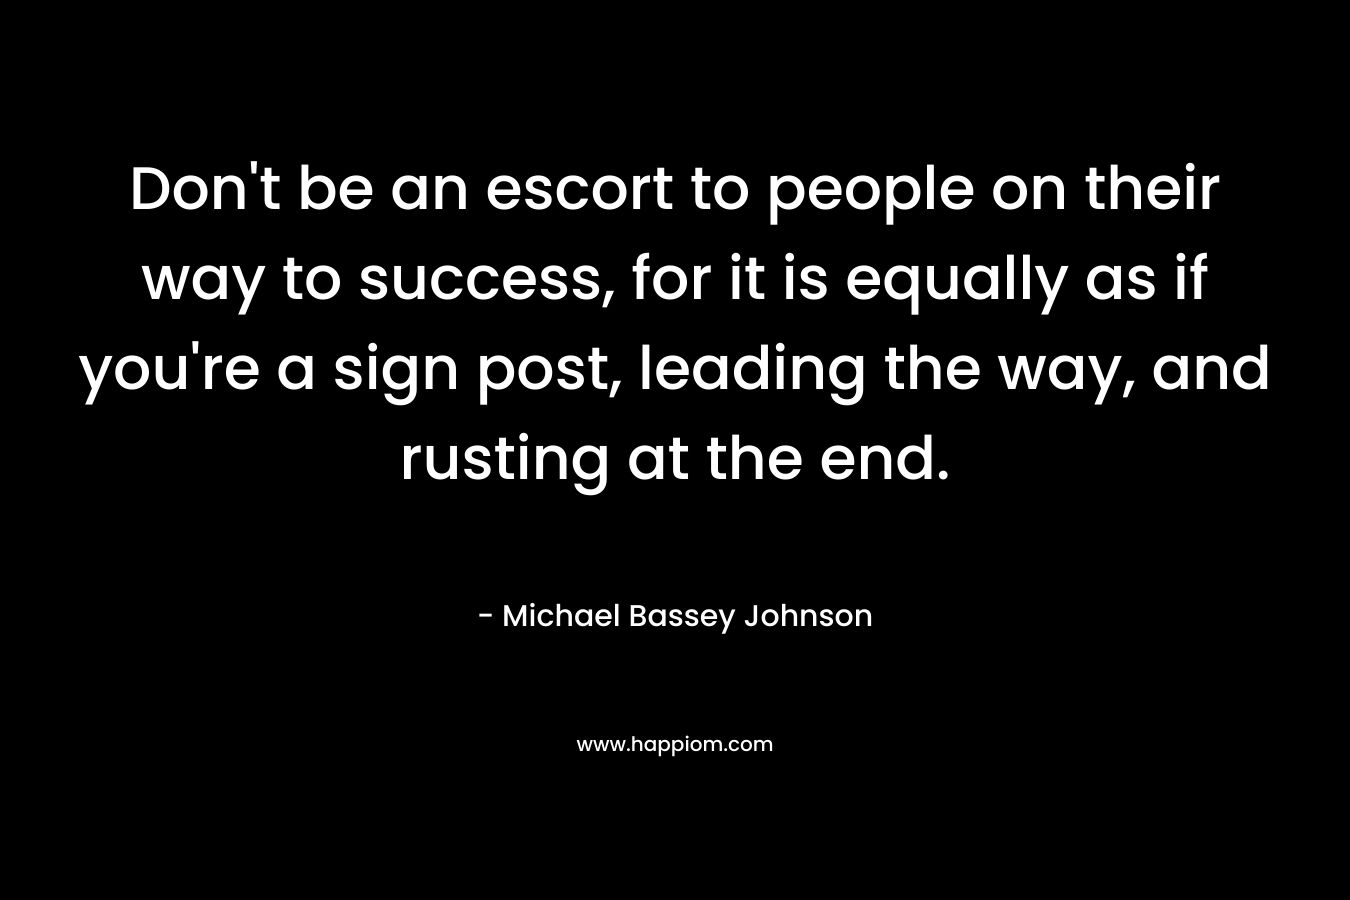 Don’t be an escort to people on their way to success, for it is equally as if you’re a sign post, leading the way, and rusting at the end. – Michael Bassey Johnson